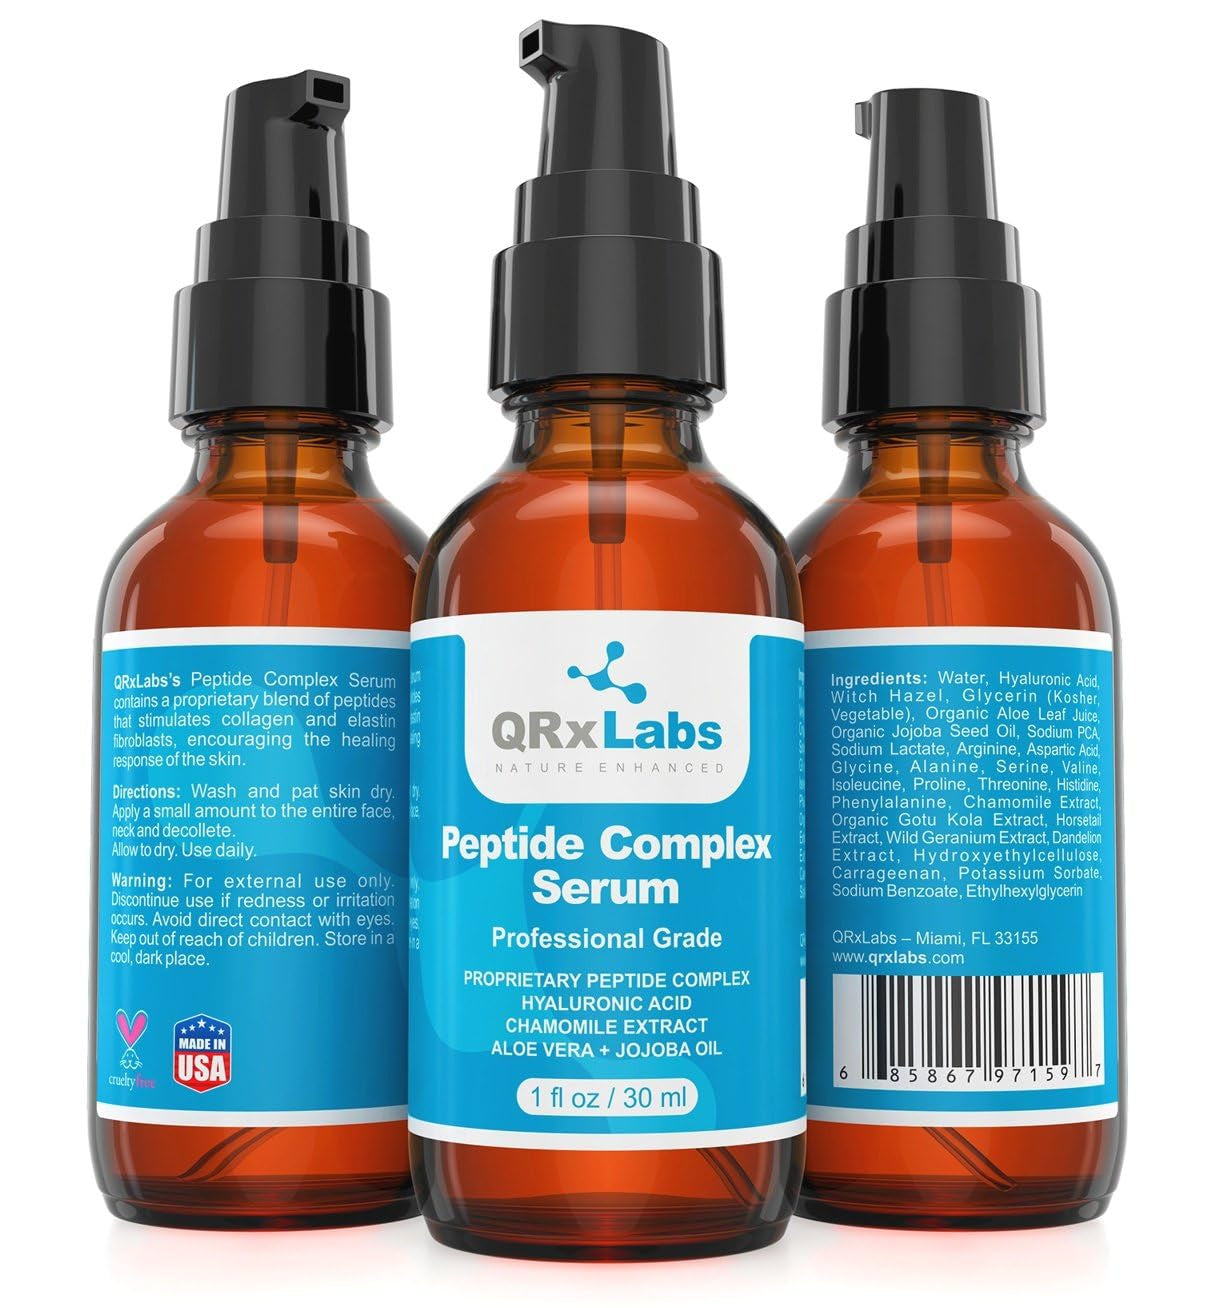 Peptide Complex Serum Collagen Booster for the Face with Hyaluronic Acid and Chamomile Extract - Anti-Aging Peptide Serum, Reduces Wrinkles, Heals and Repairs Skin - Tightening Effect - 1 Fl Oz - Free & Fast Delivery